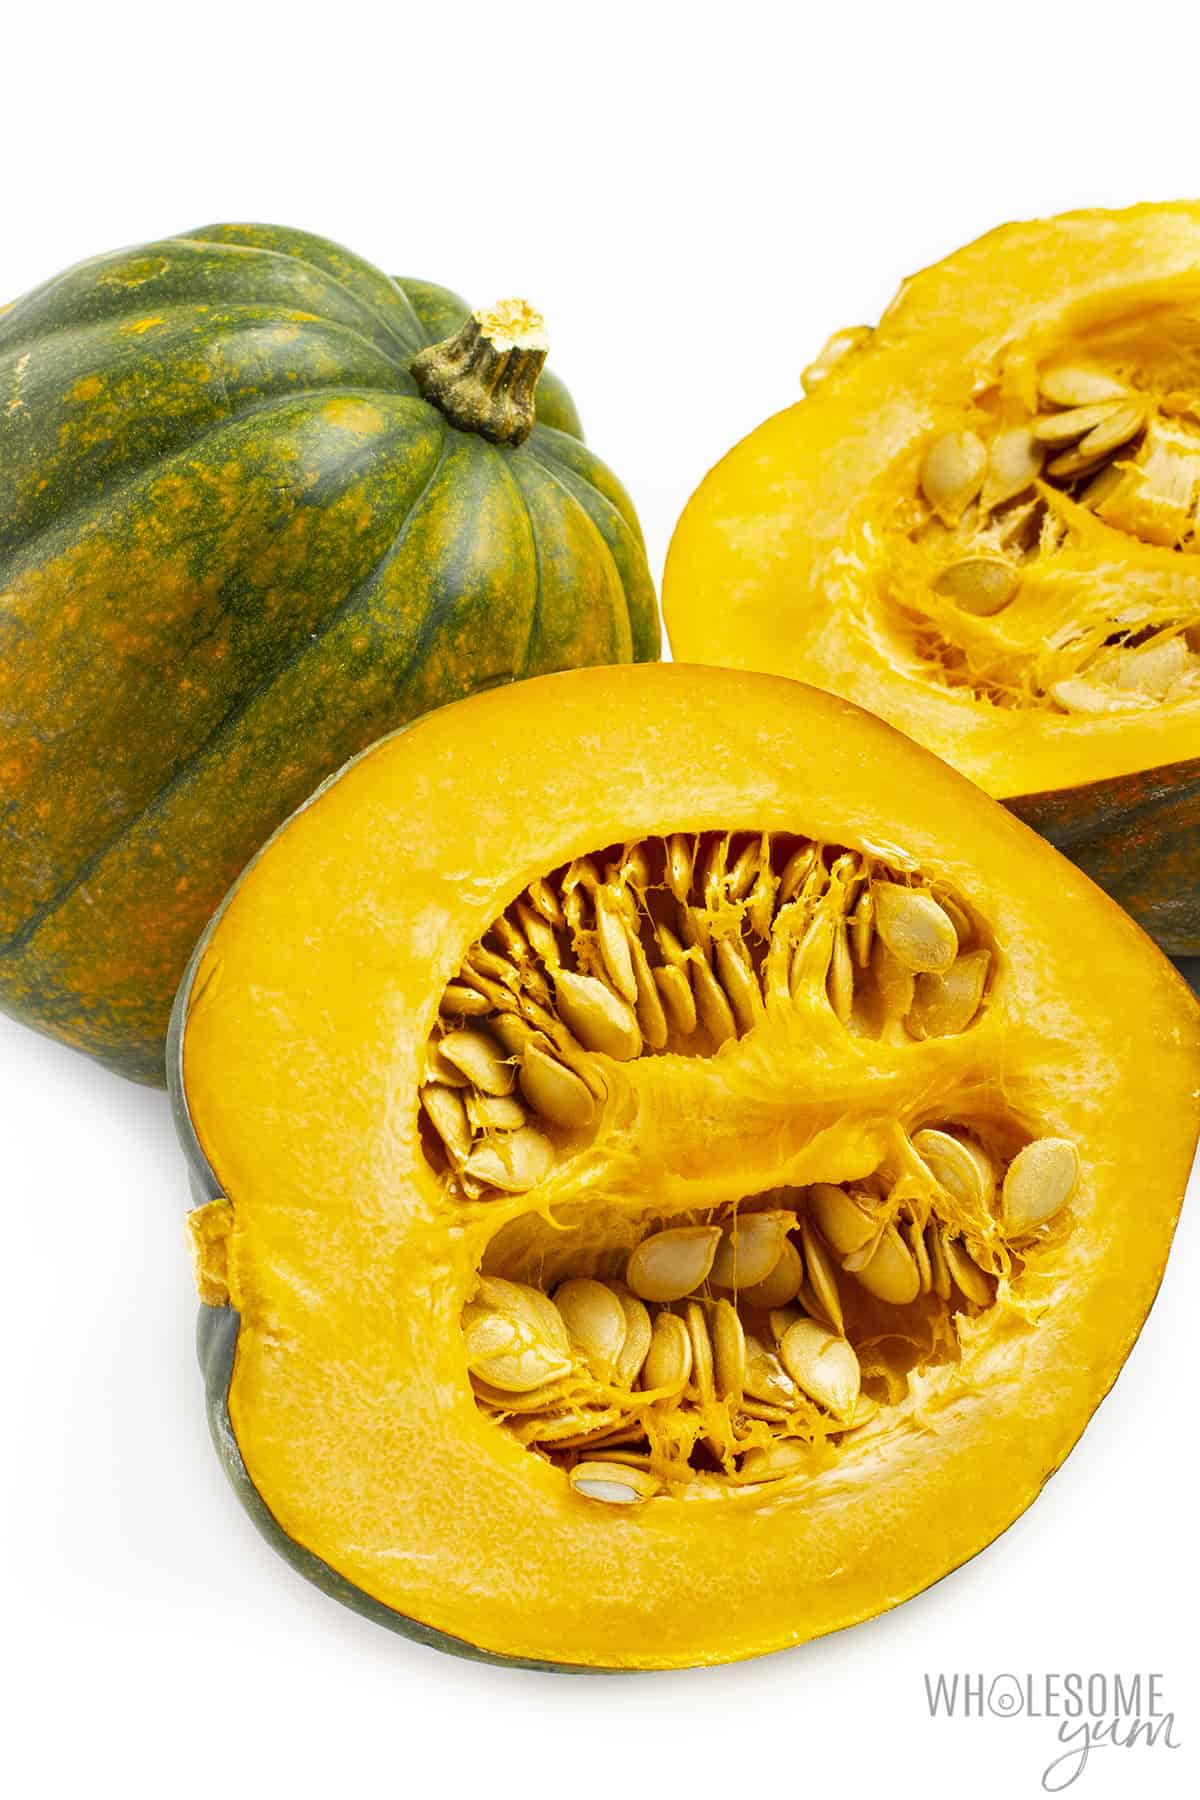 How many carbs in acorn squash? These sliced acorn squashes contain too many carbs for a keto lifestyle.